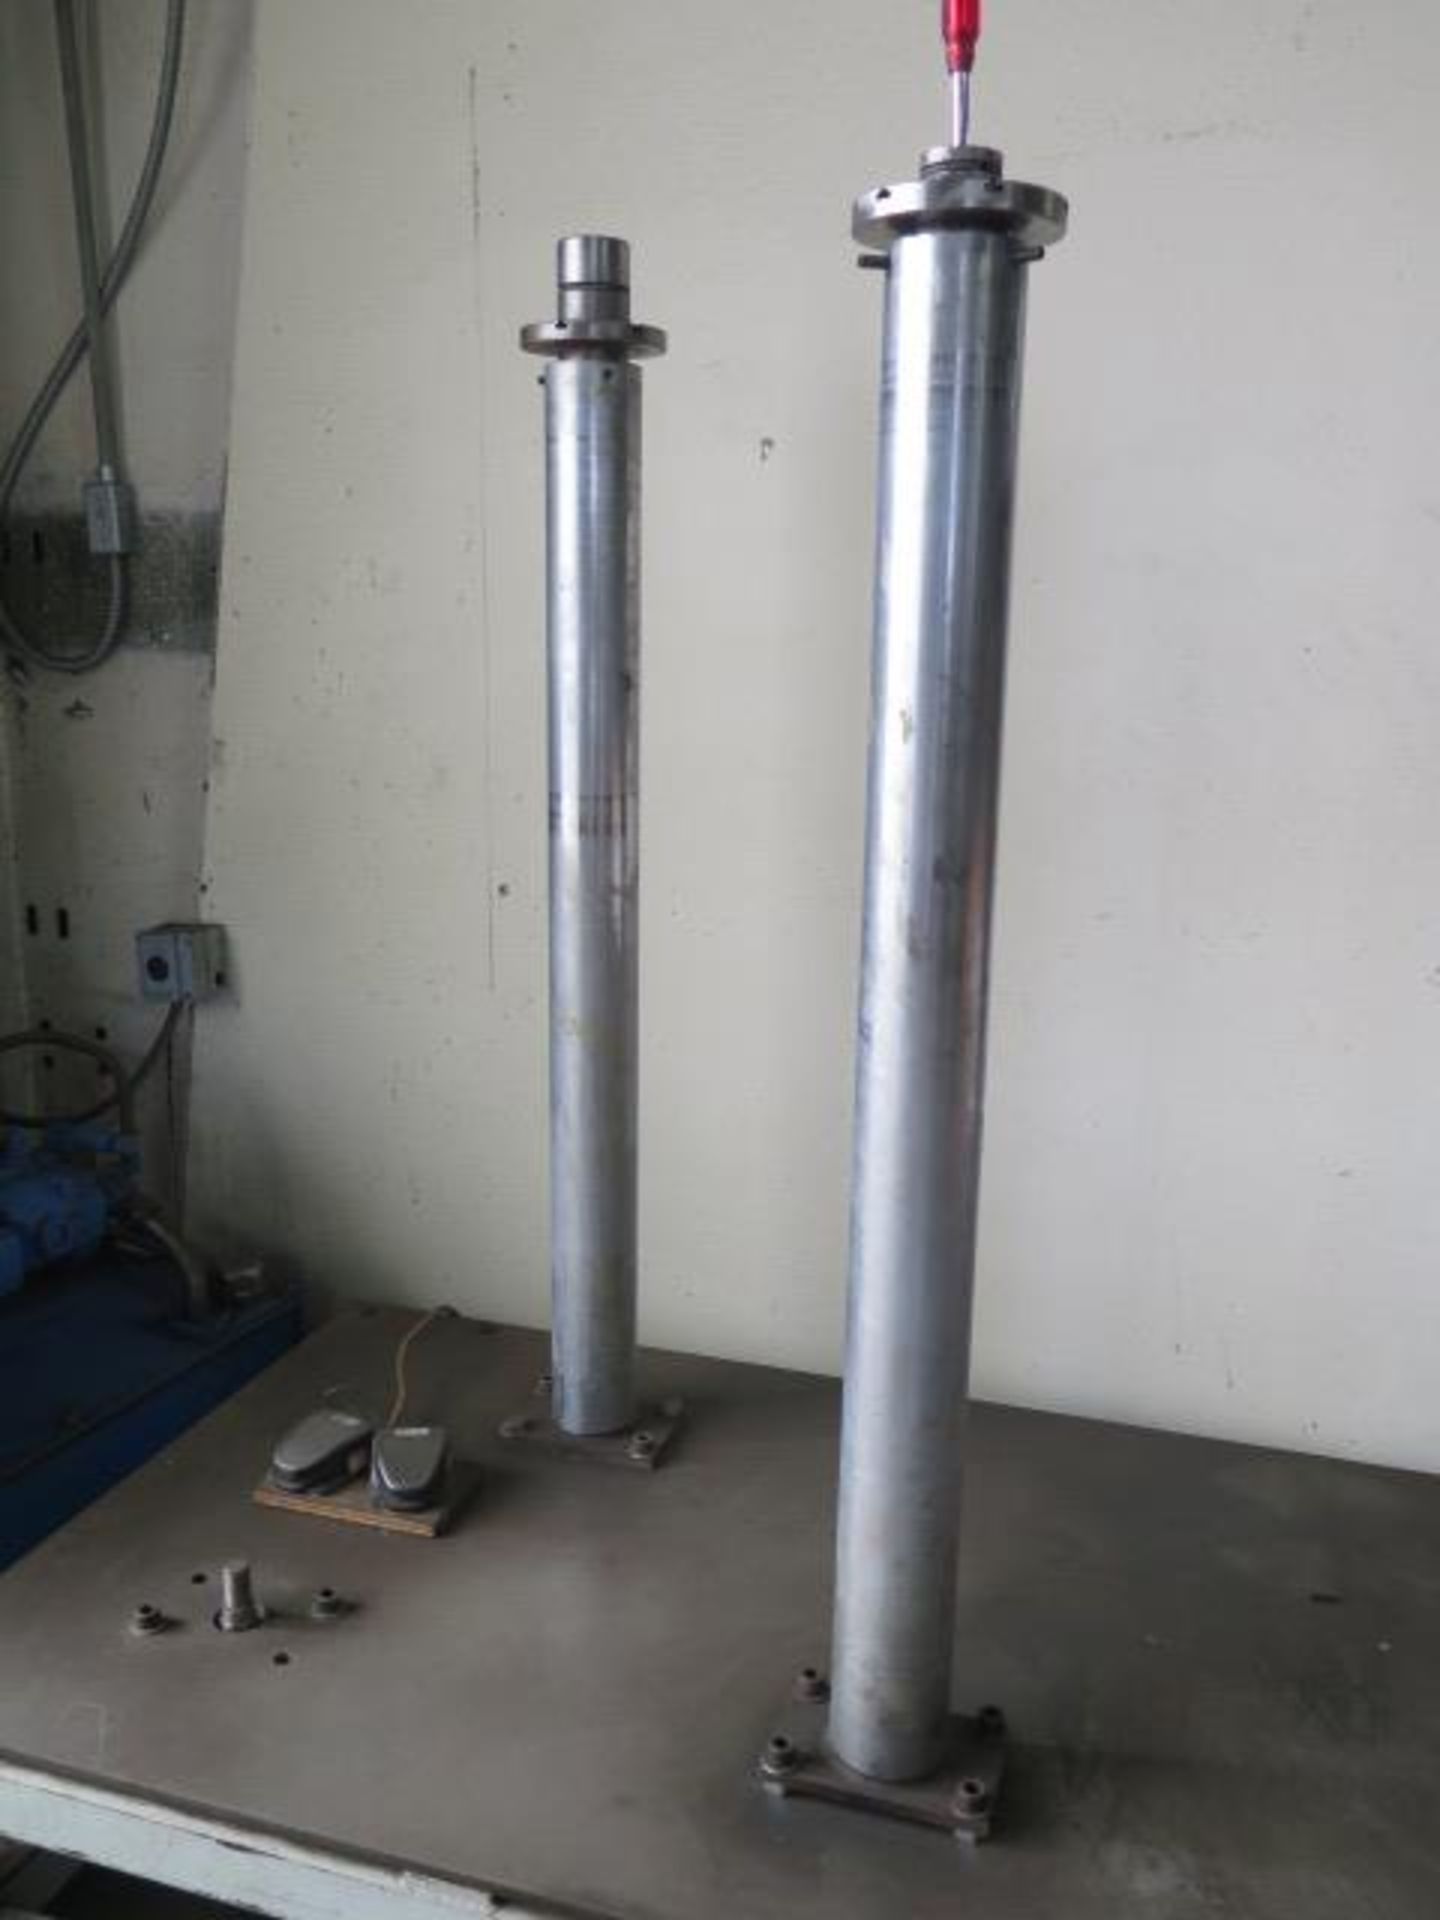 Custom Hydraulic J-Flange Expander w/ 36” x 72” Table, Dies to 6” (SOLD AS-IS - NO WARRANTY) - Image 3 of 8